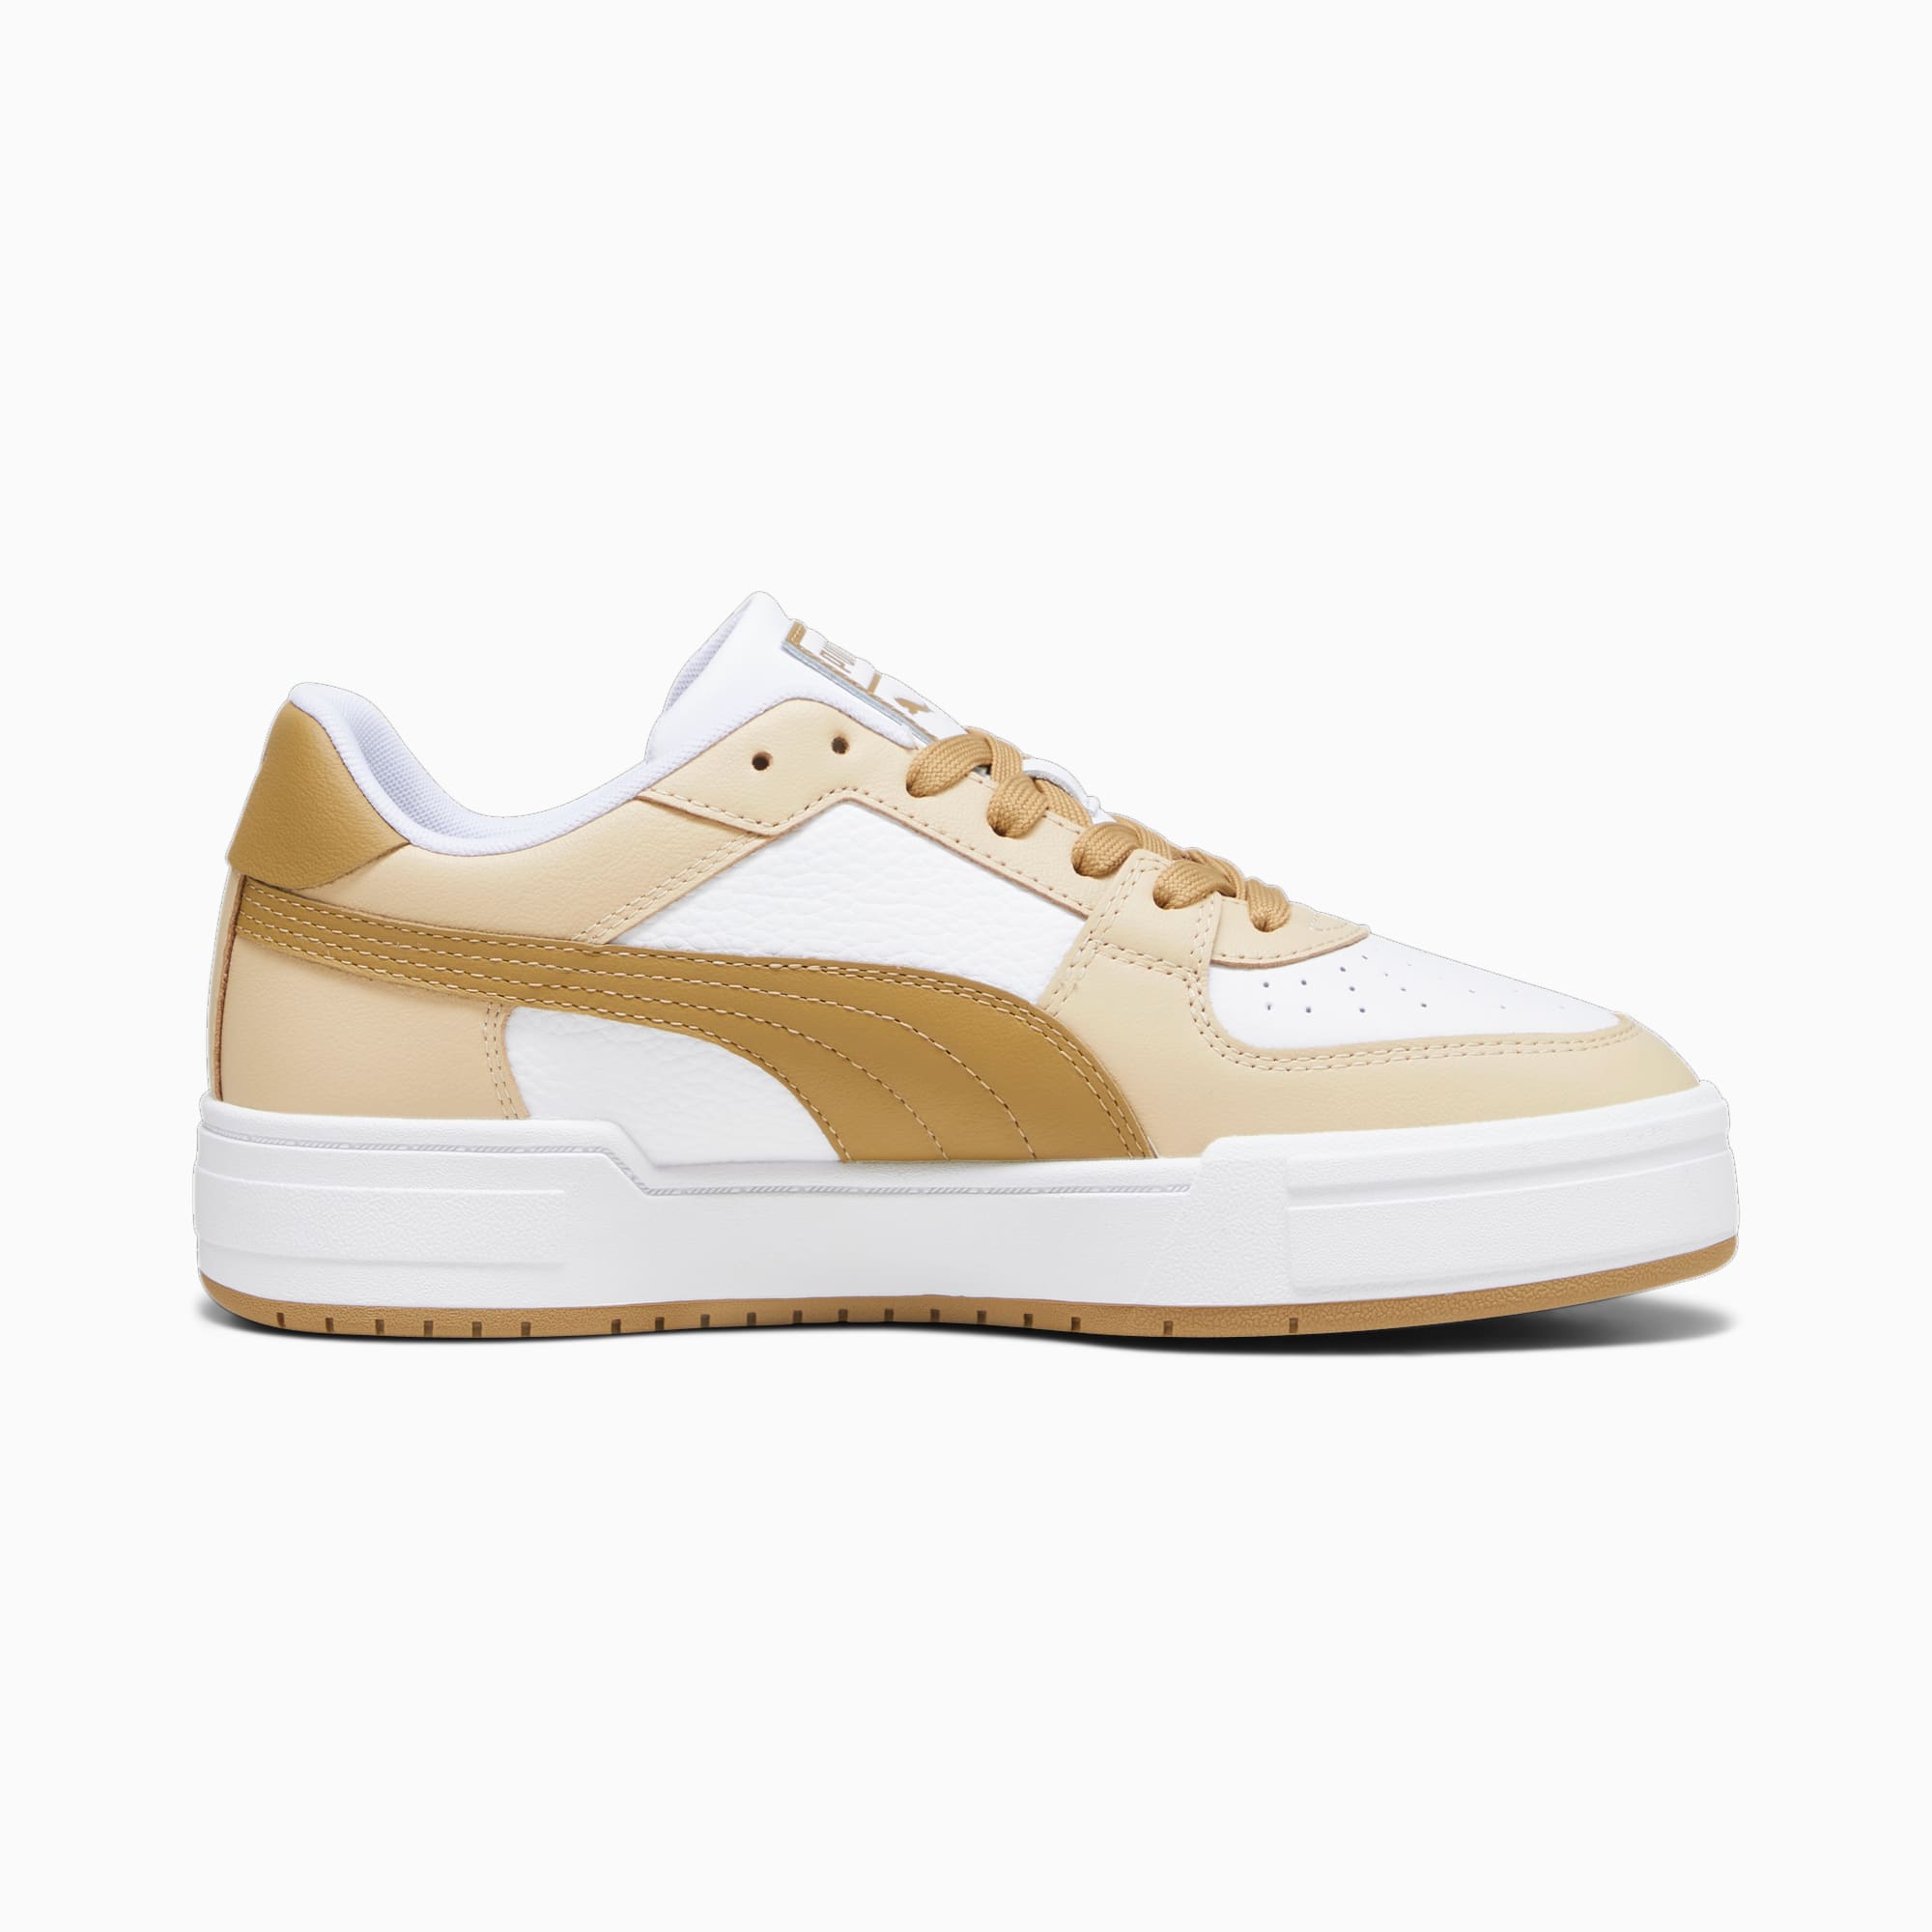 Women's PUMA Ca Pro Classic Trainers, White/Granola/Toasted, Size 47, Shoes